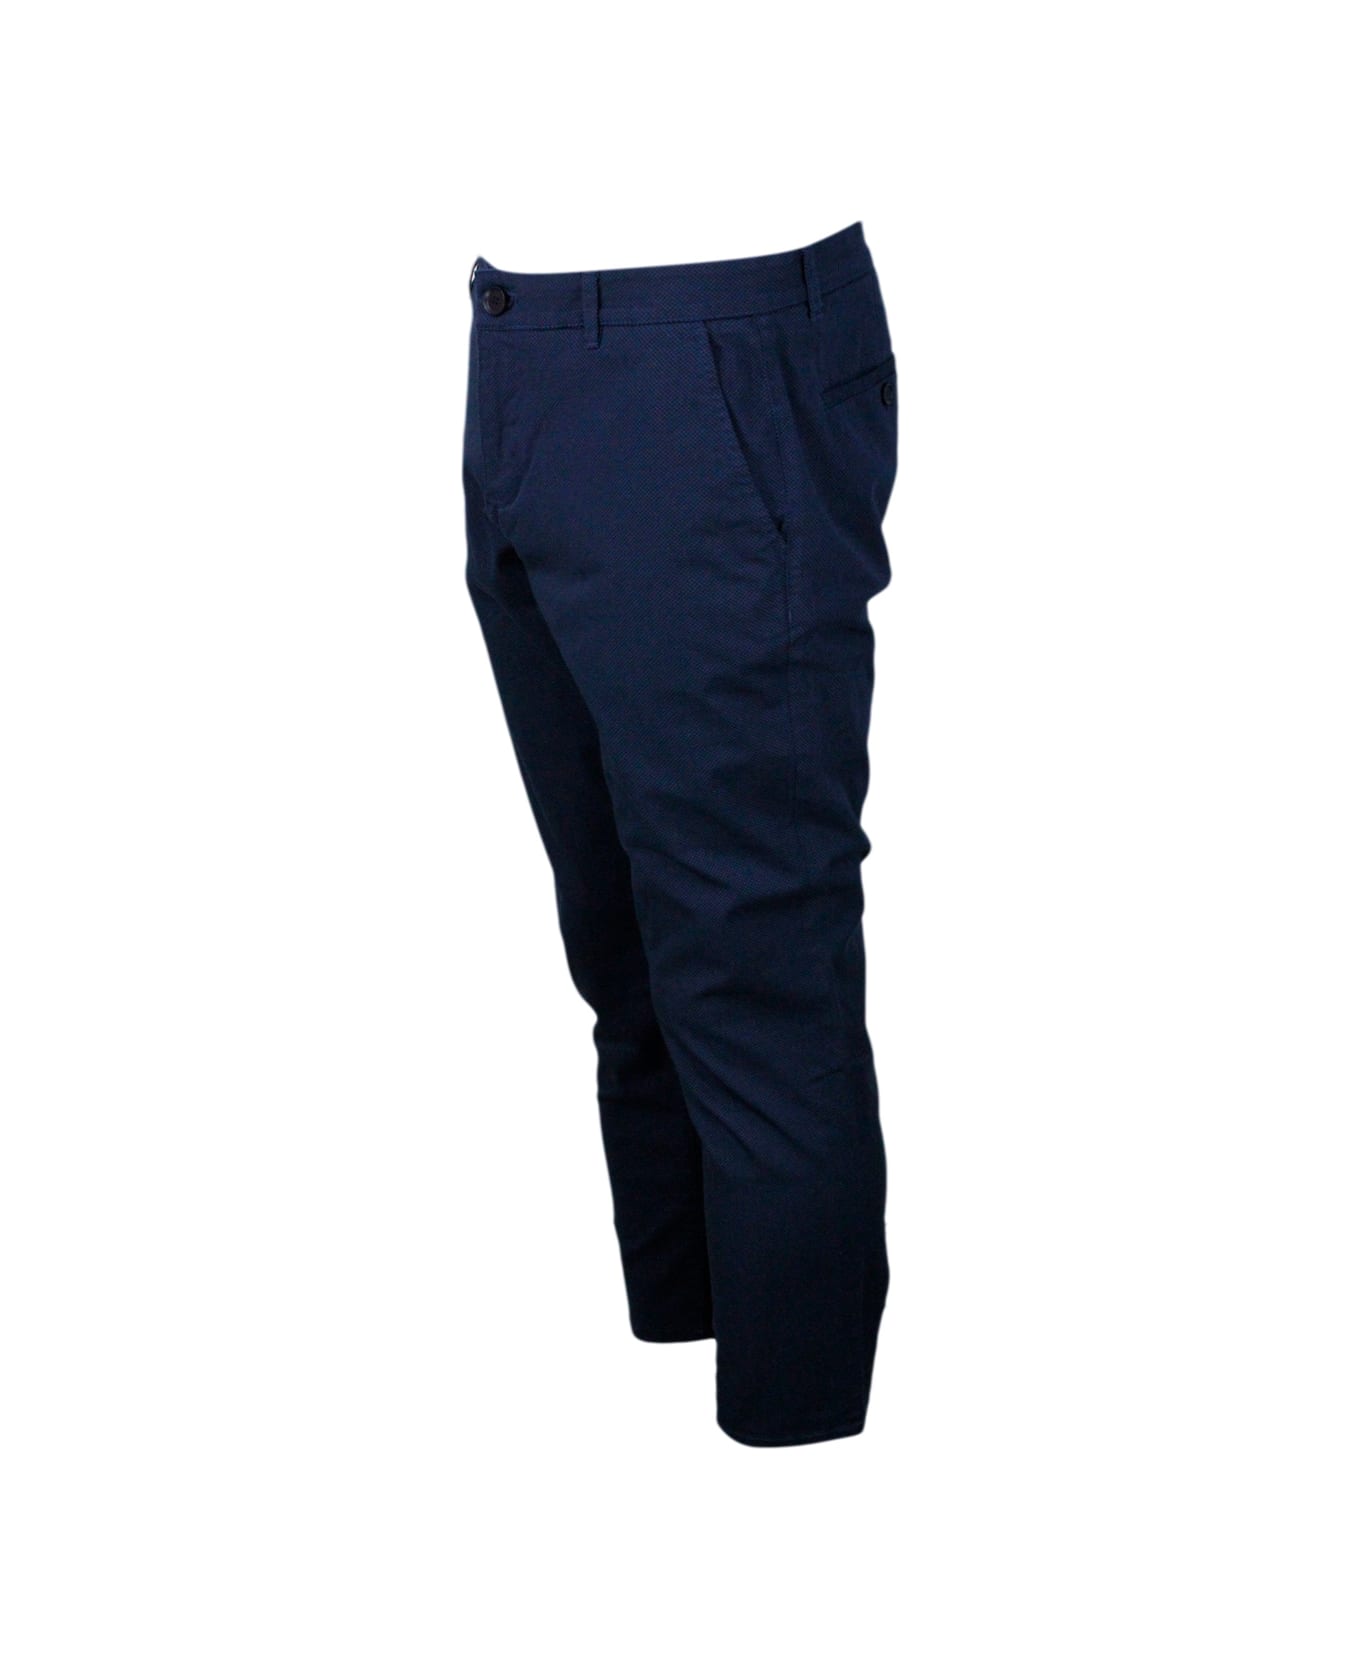 Armani Collezioni Stretch Cotton Trousers With Welt Pockets And Zip And Button Closure - Blu